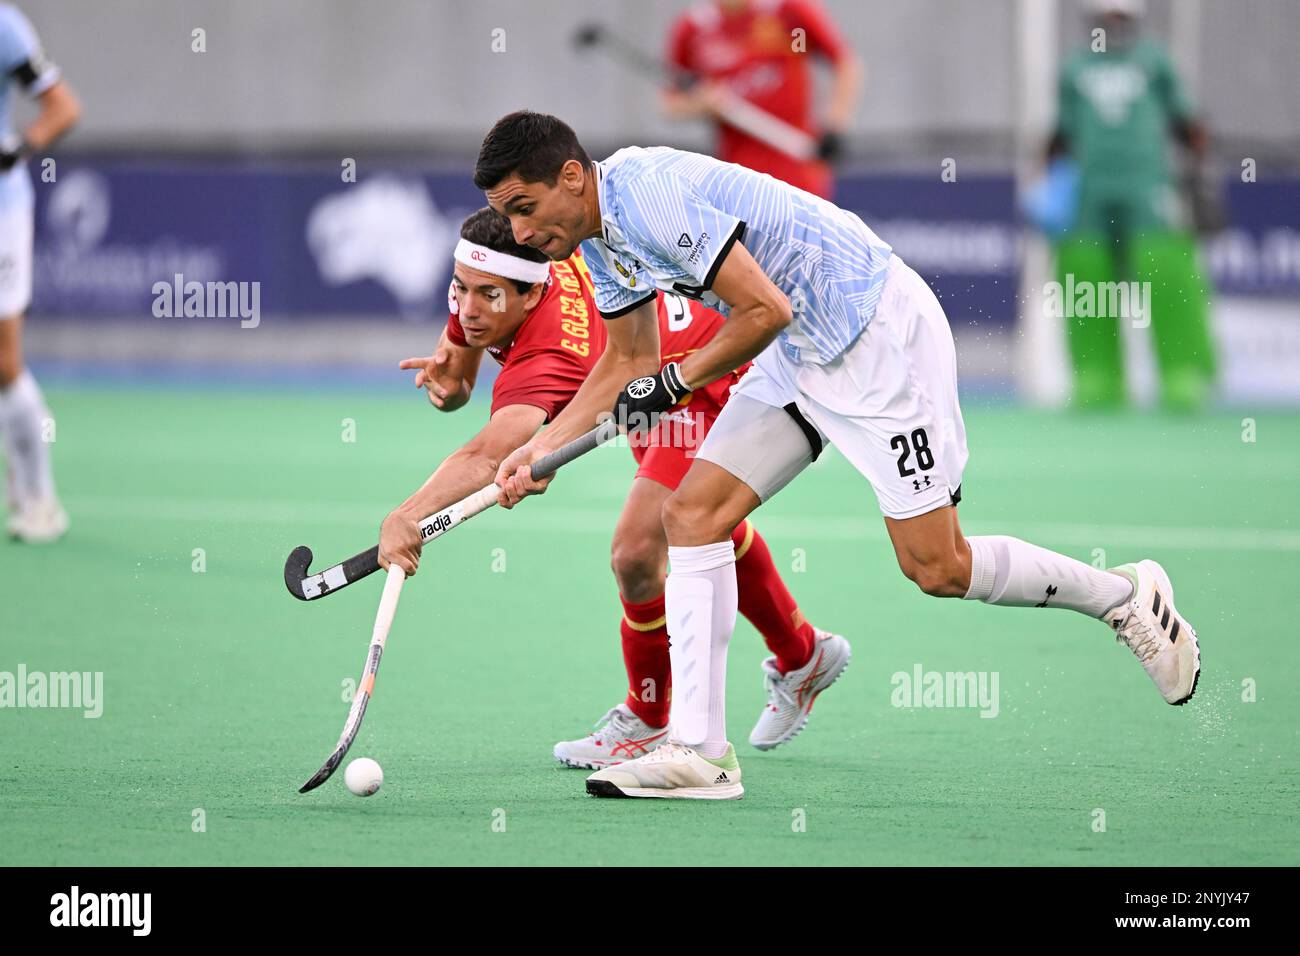 Hobart, Australia. 02nd Mar, 2023. Enrique González (L) of USA Men's National field hockey team and Federico Fernandez (R) of Argentina Men's National field hockey team in action during the 2022/23 International Hockey Federation (FIH) Men's Pro-League match between Argentina and Spain held at the Tasmanian Hockey Centre in Hobart. Final score Spain 4:3 Argentina. Credit: SOPA Images Limited/Alamy Live News Stock Photo